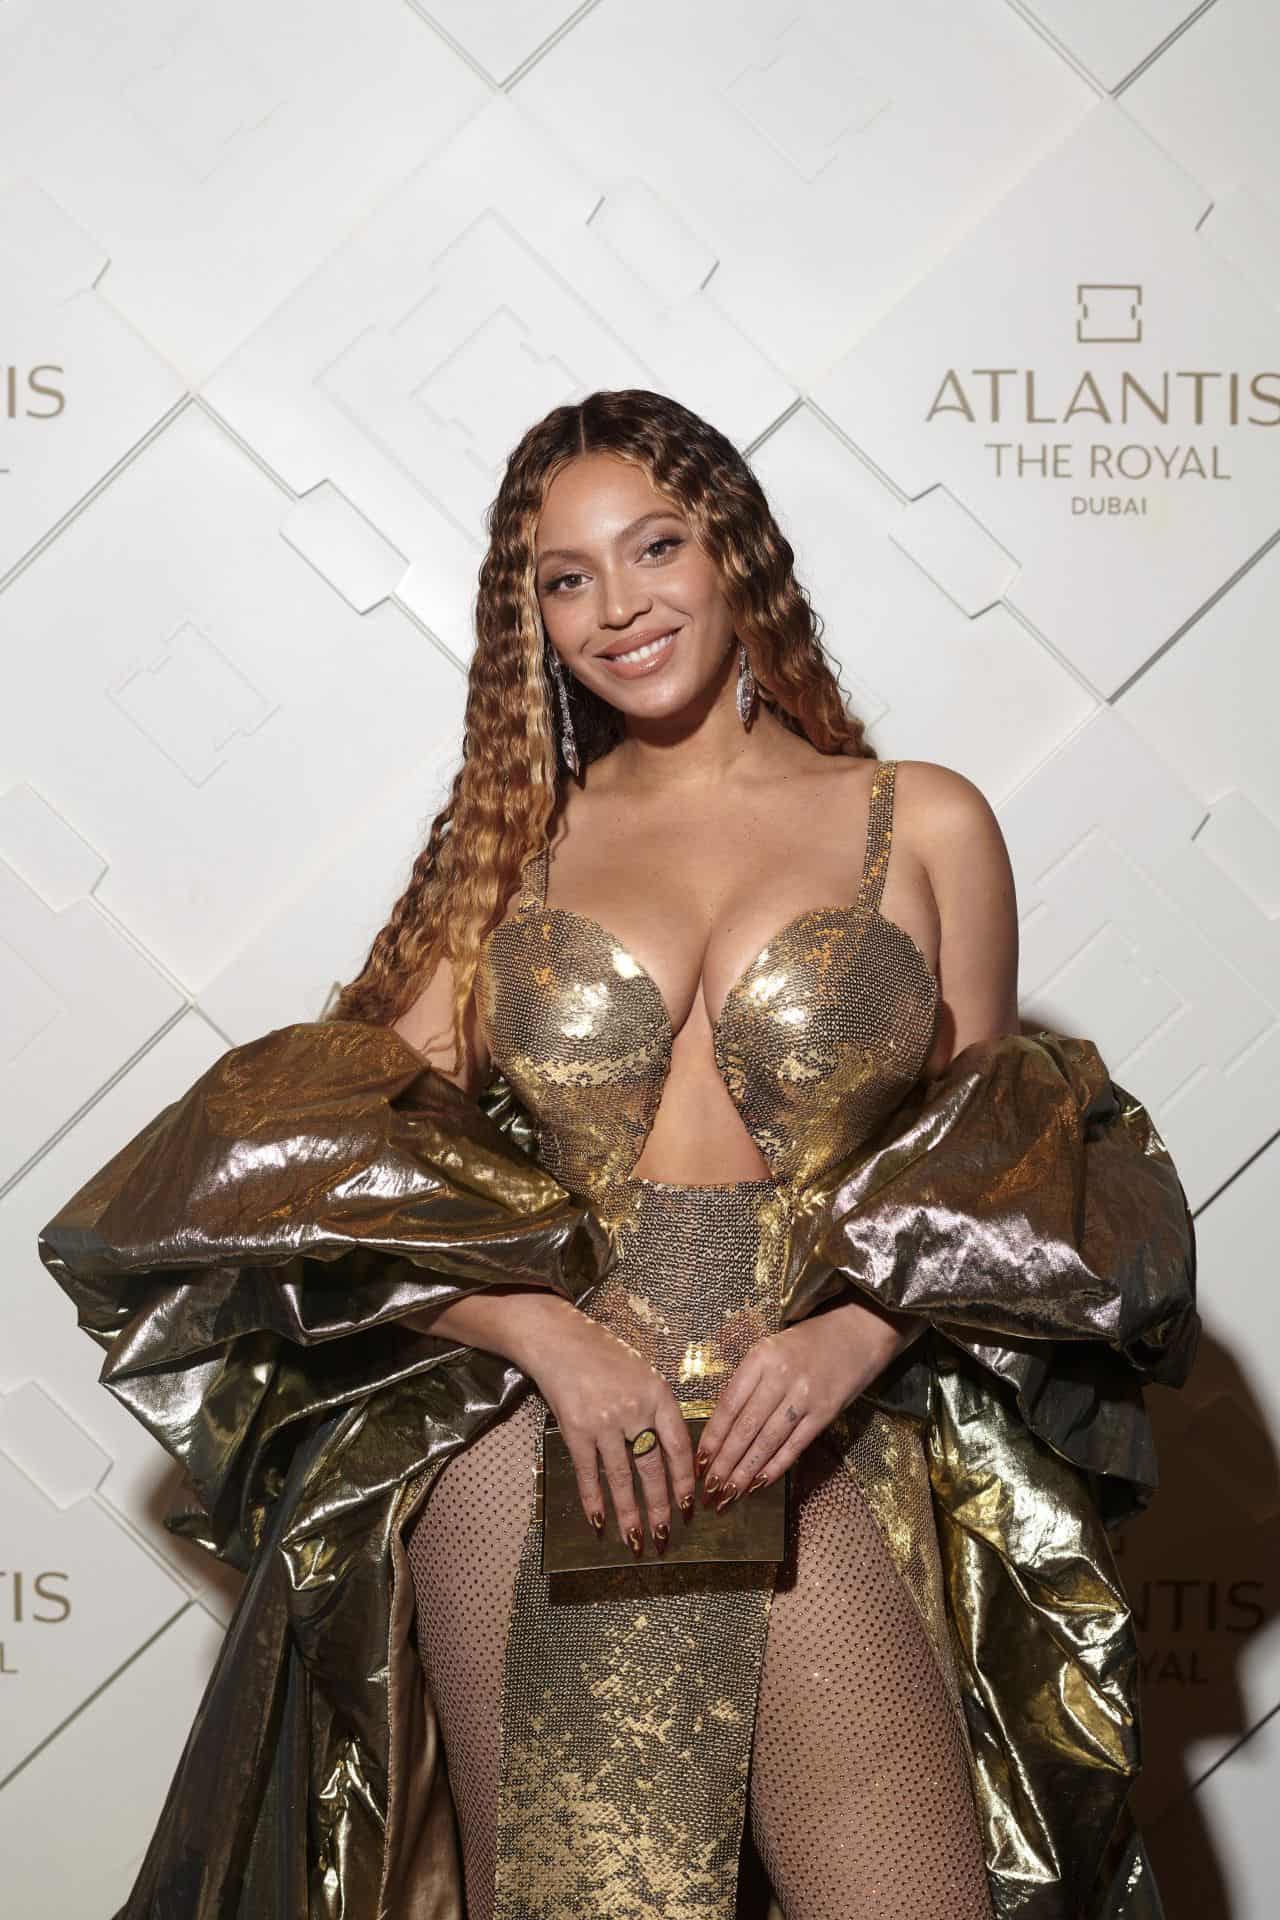 Beyonce Shines in Gold Gown at Dubai's Atlantis The Royal Hotel Opening